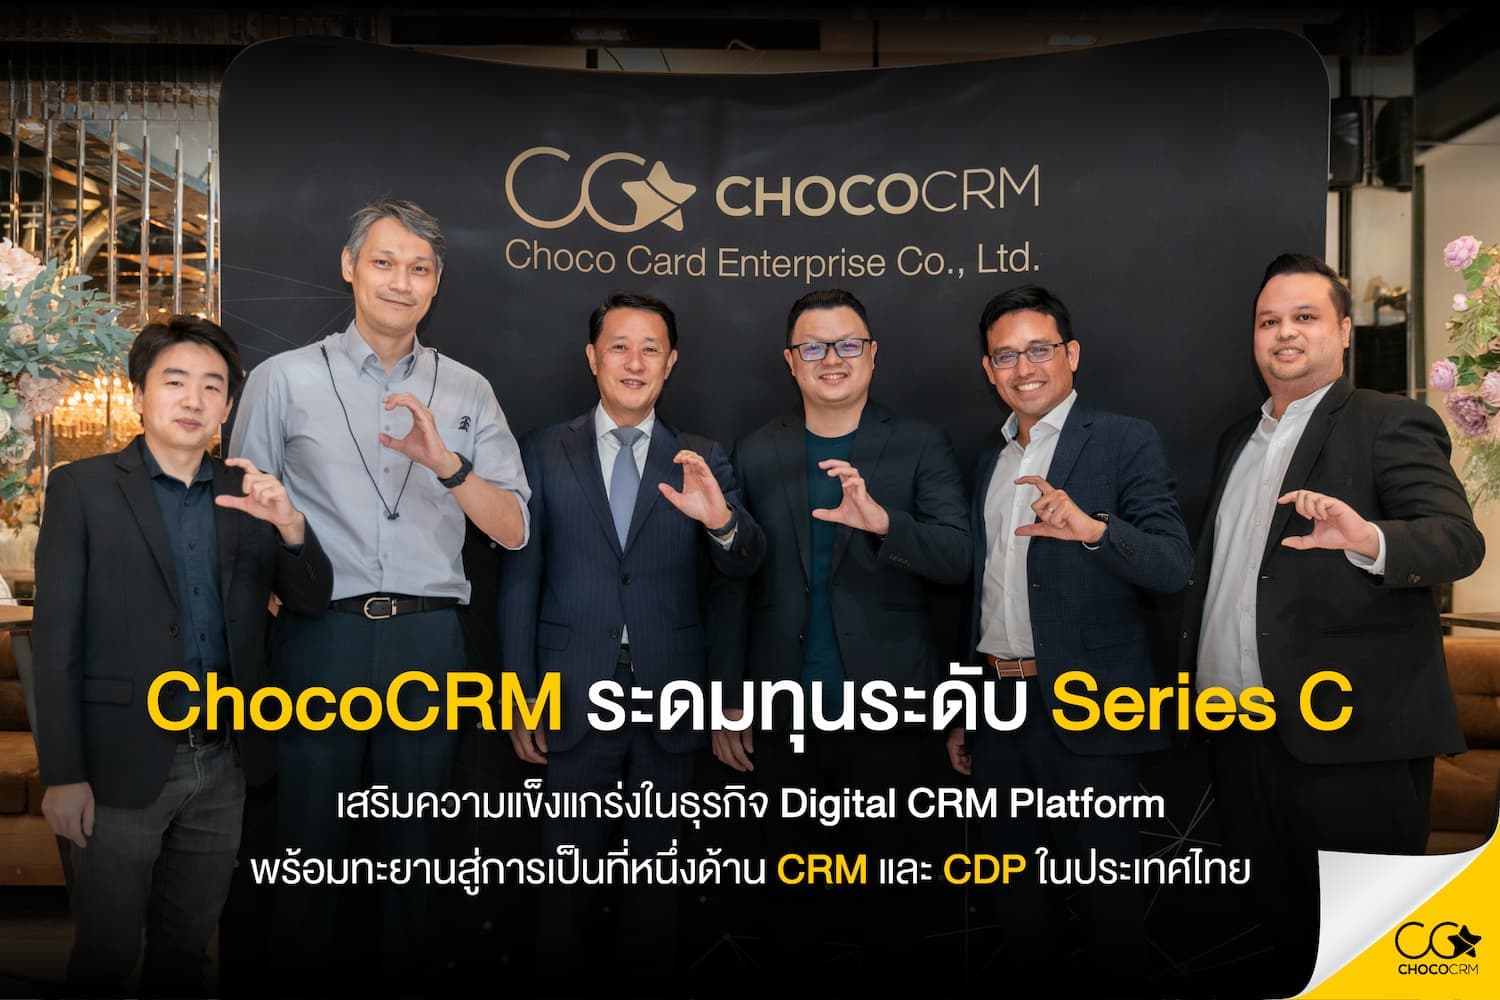 ChocoCRM partnering up with 3 investors in $8M USD Series C investment